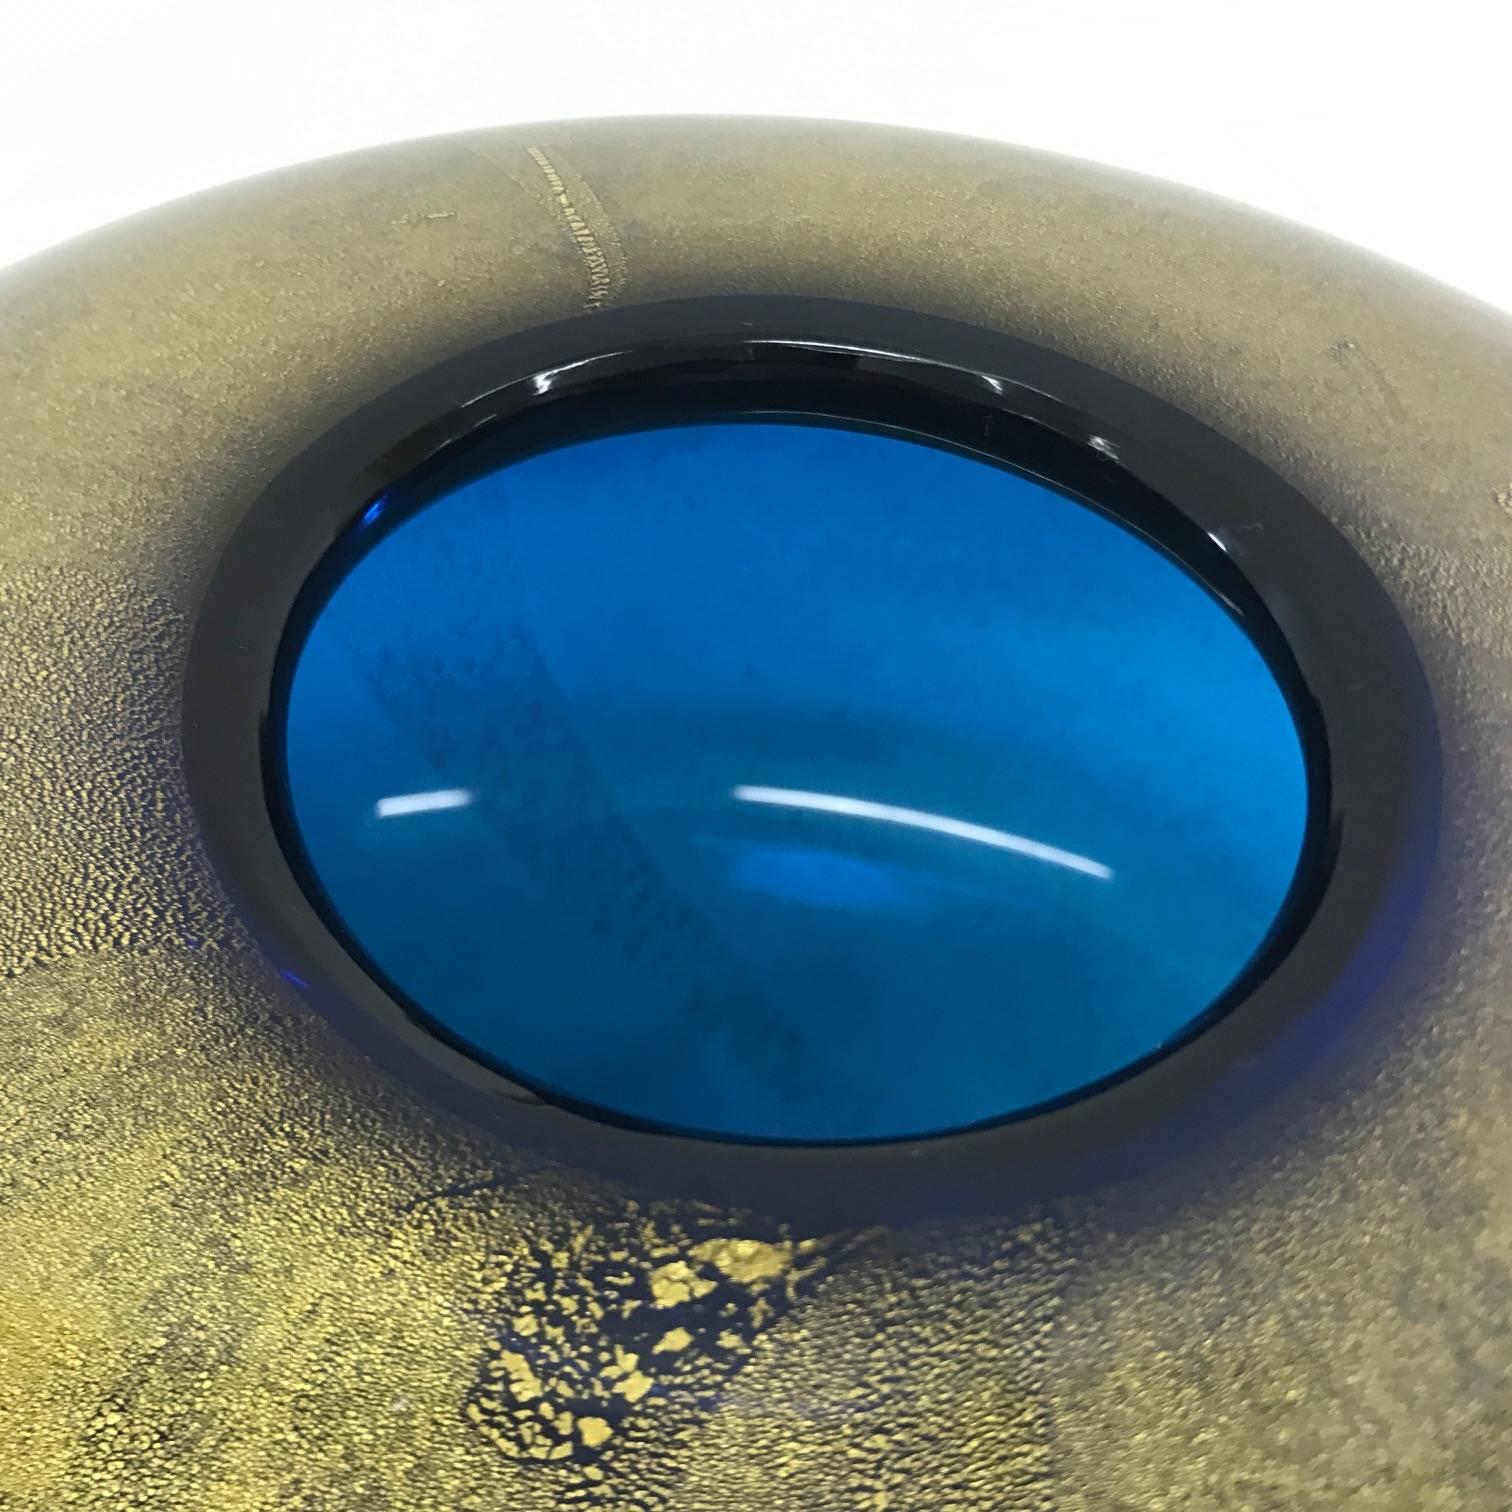 Vase from Venini, signed Laura Venini 2001, in perfect conditions, produced with a particular process and the use of gold inside the glass. The inside color is blue.